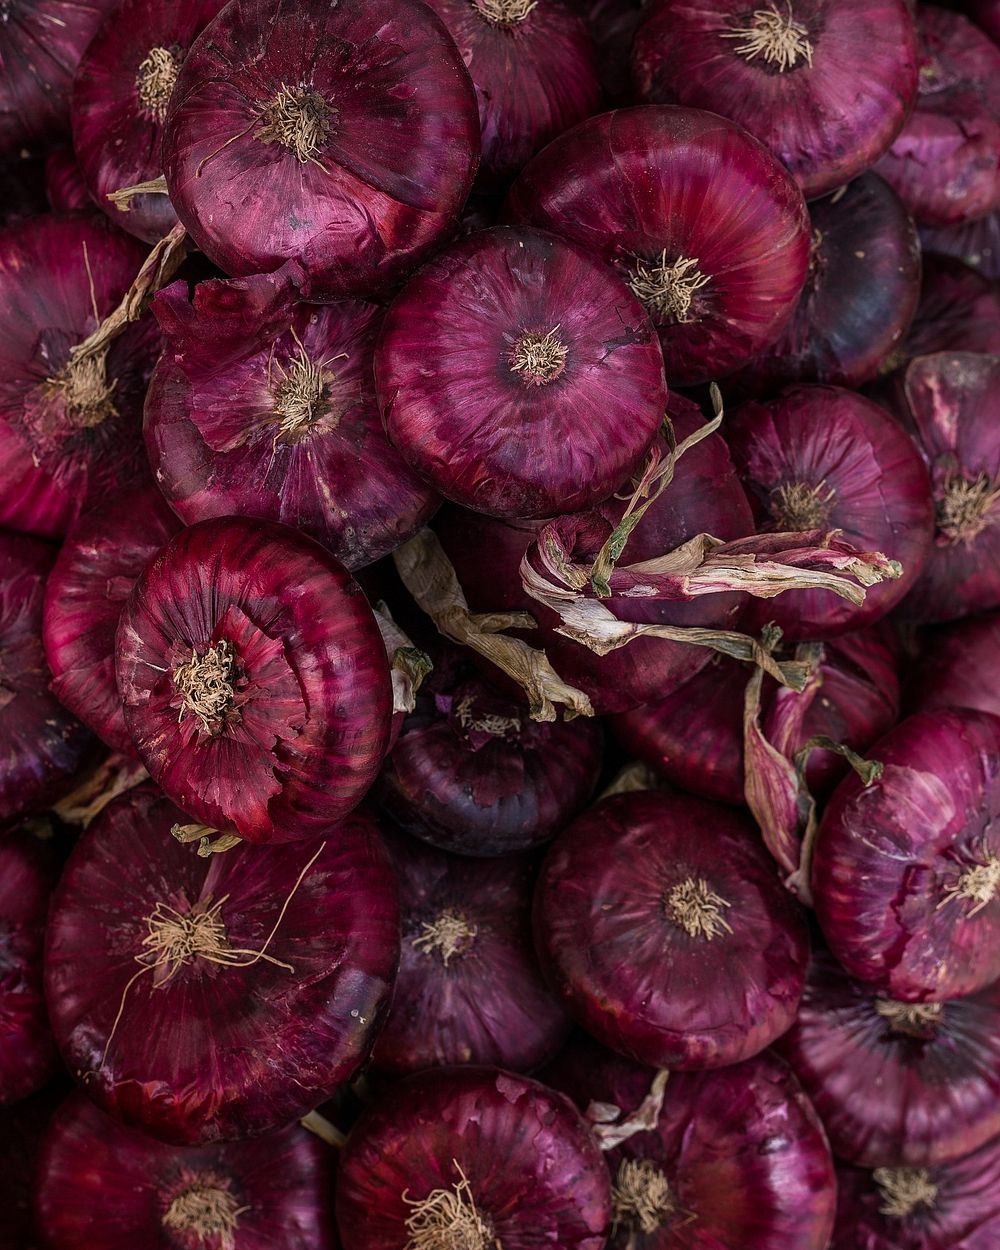 Free pile of red onions photo, public domain food CC0 image.